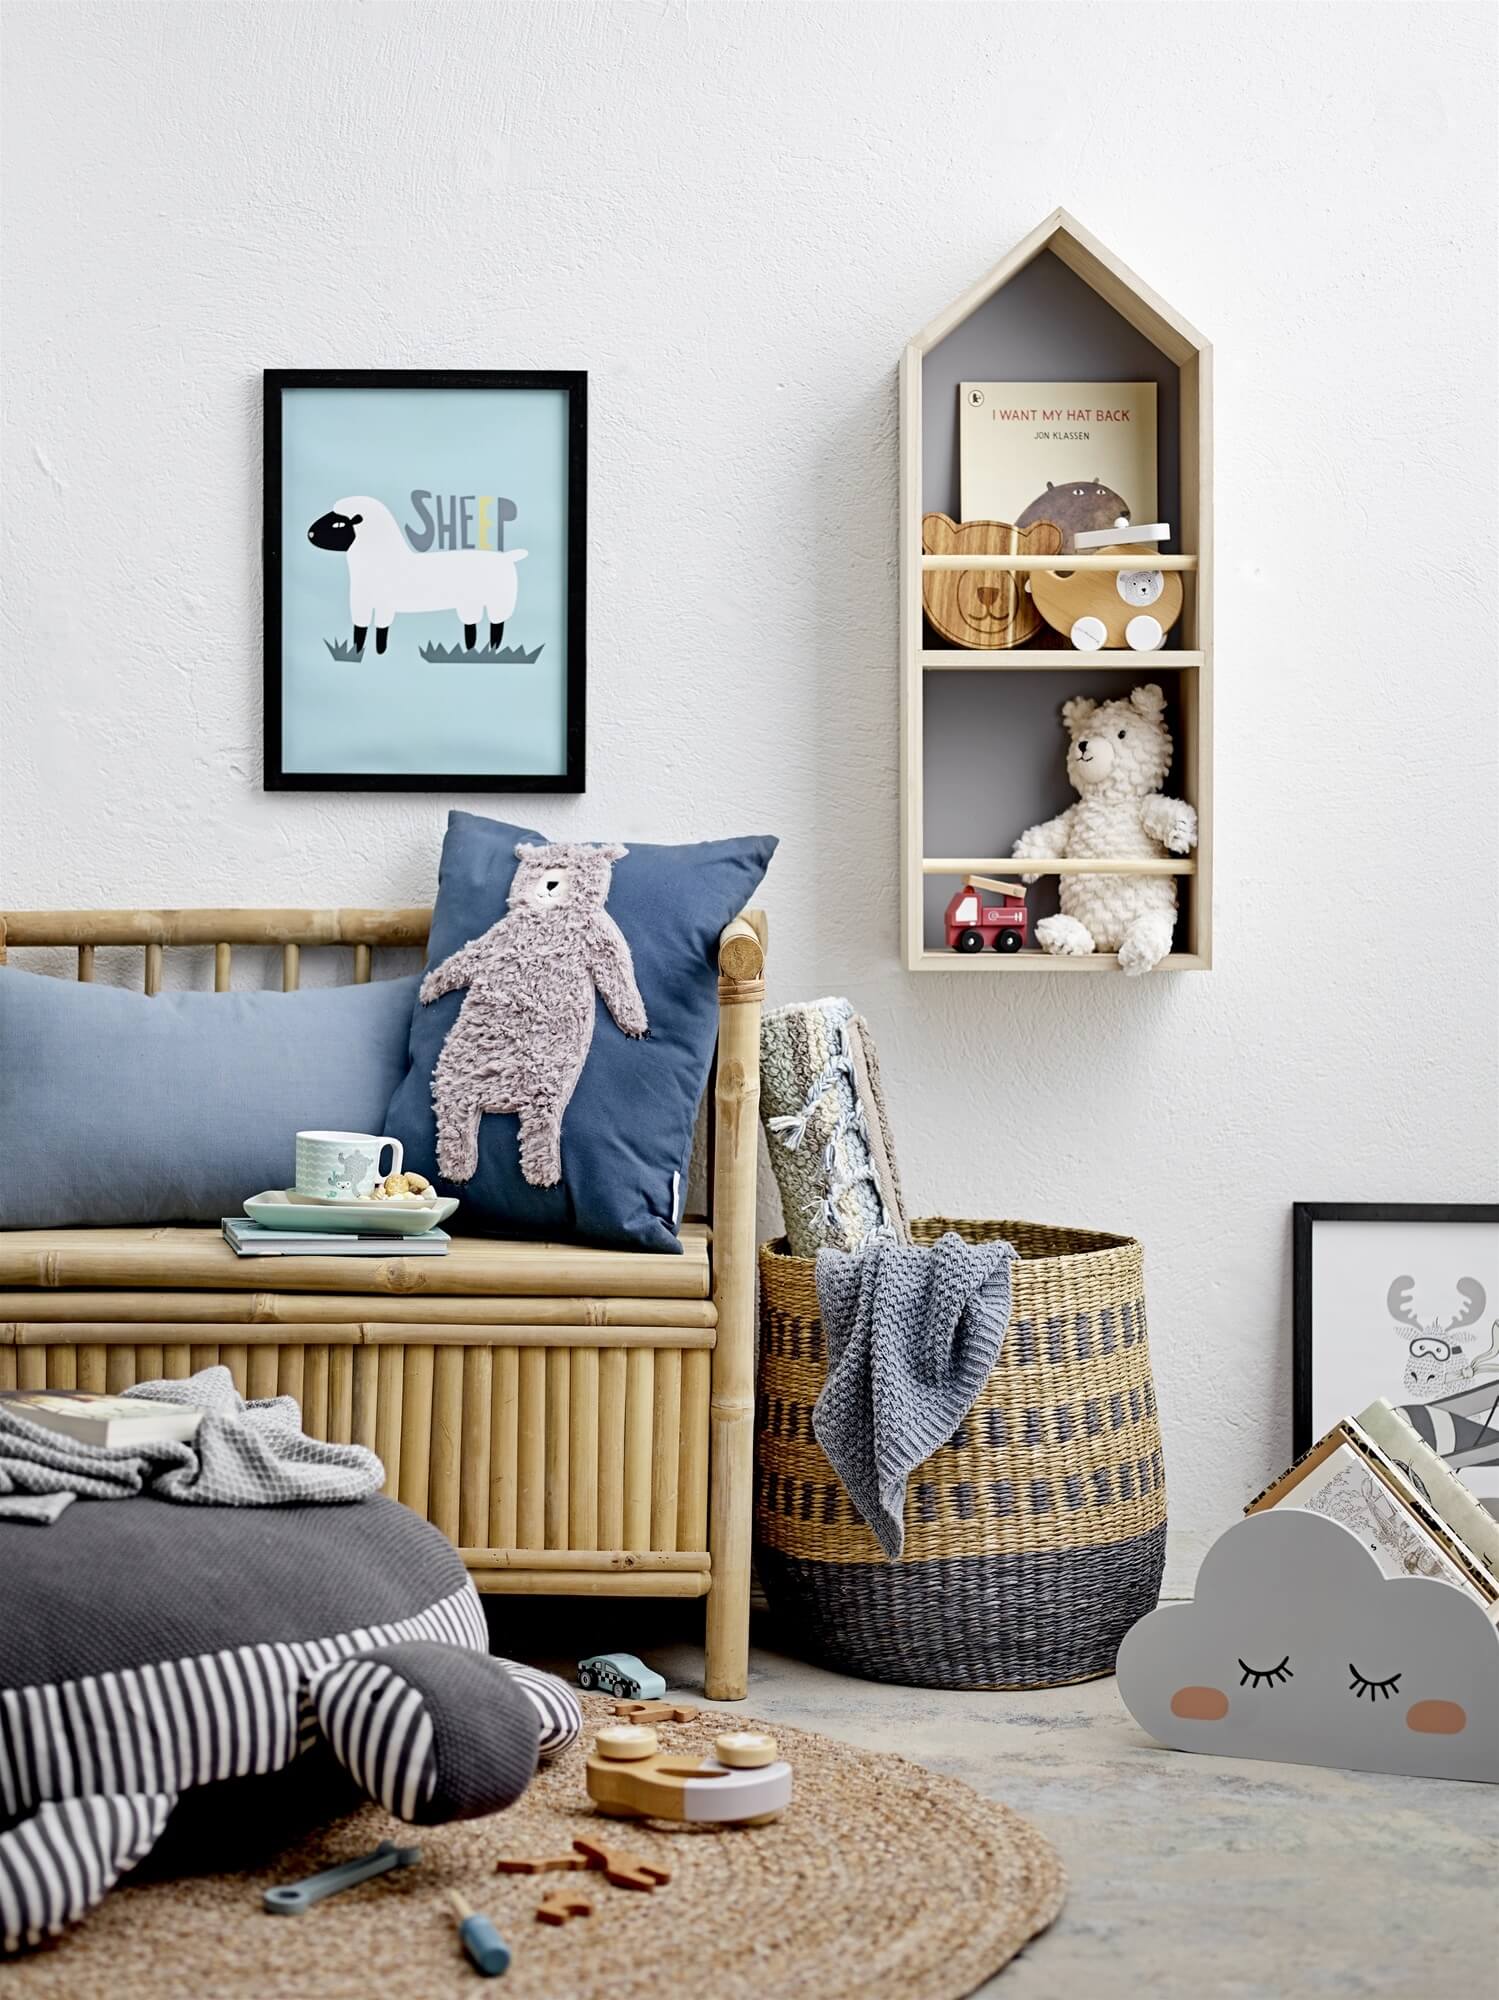 Natural home decor and accessories for children